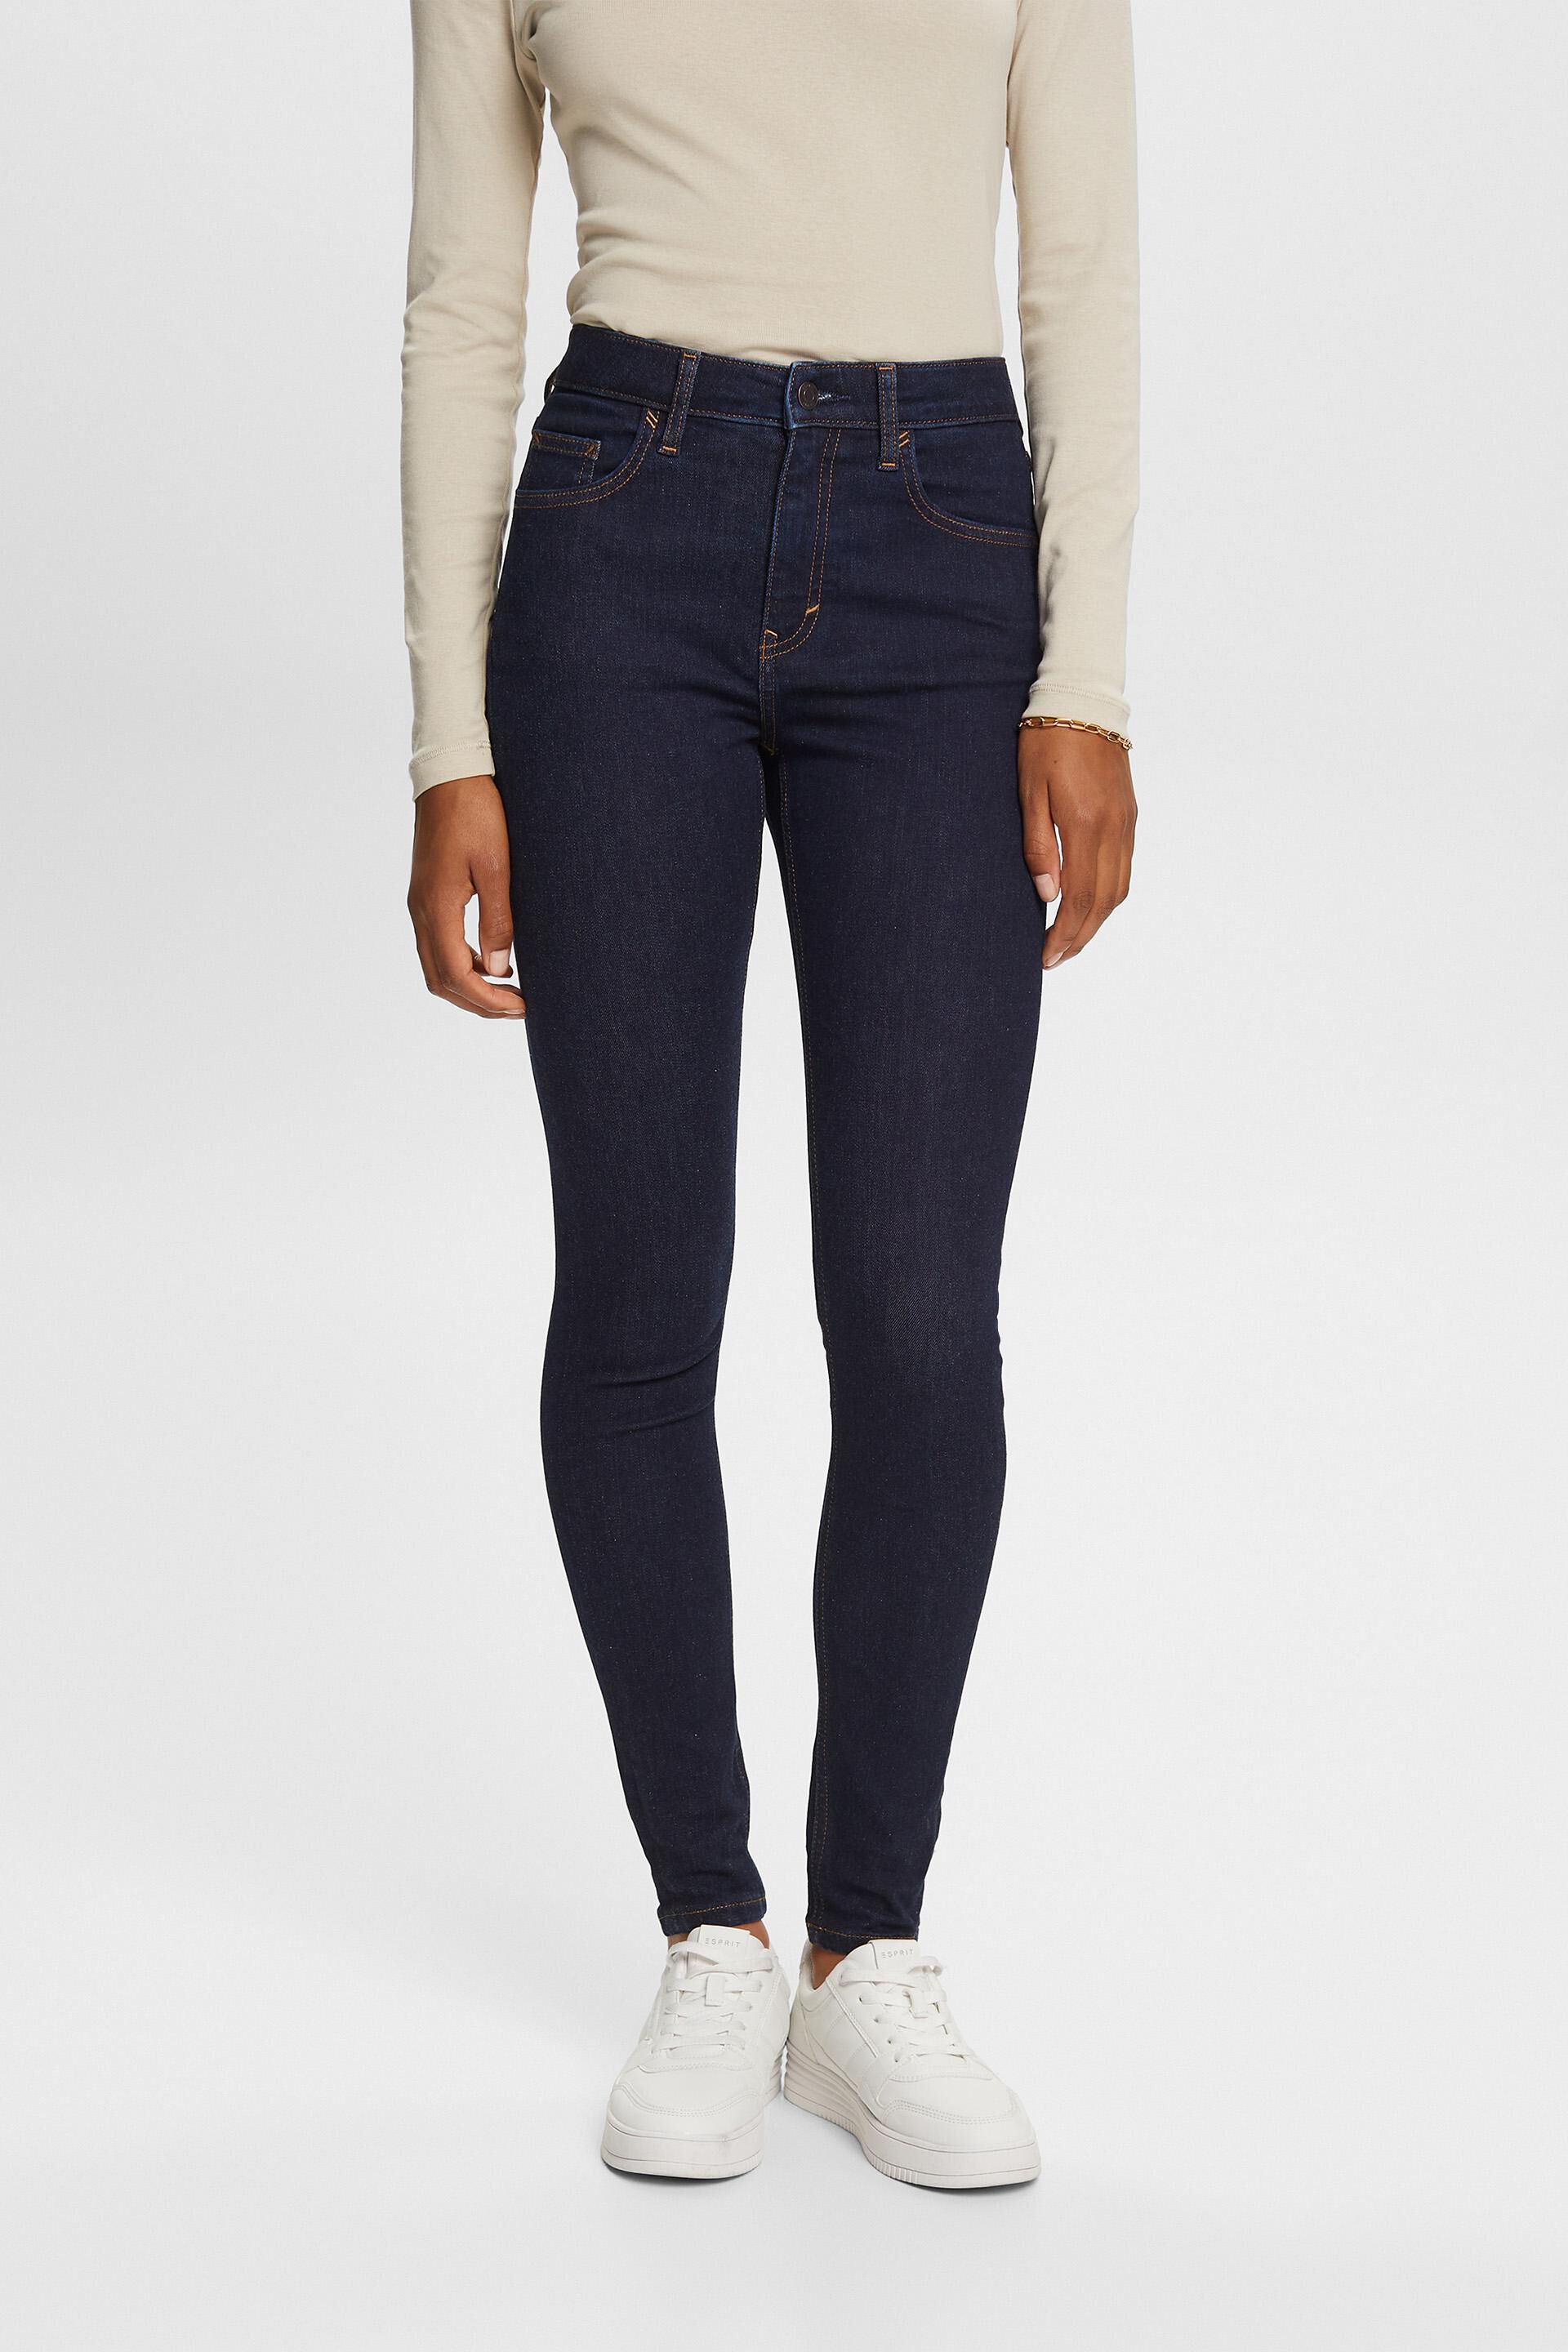 Highrise skinny jeans, stretch cotton